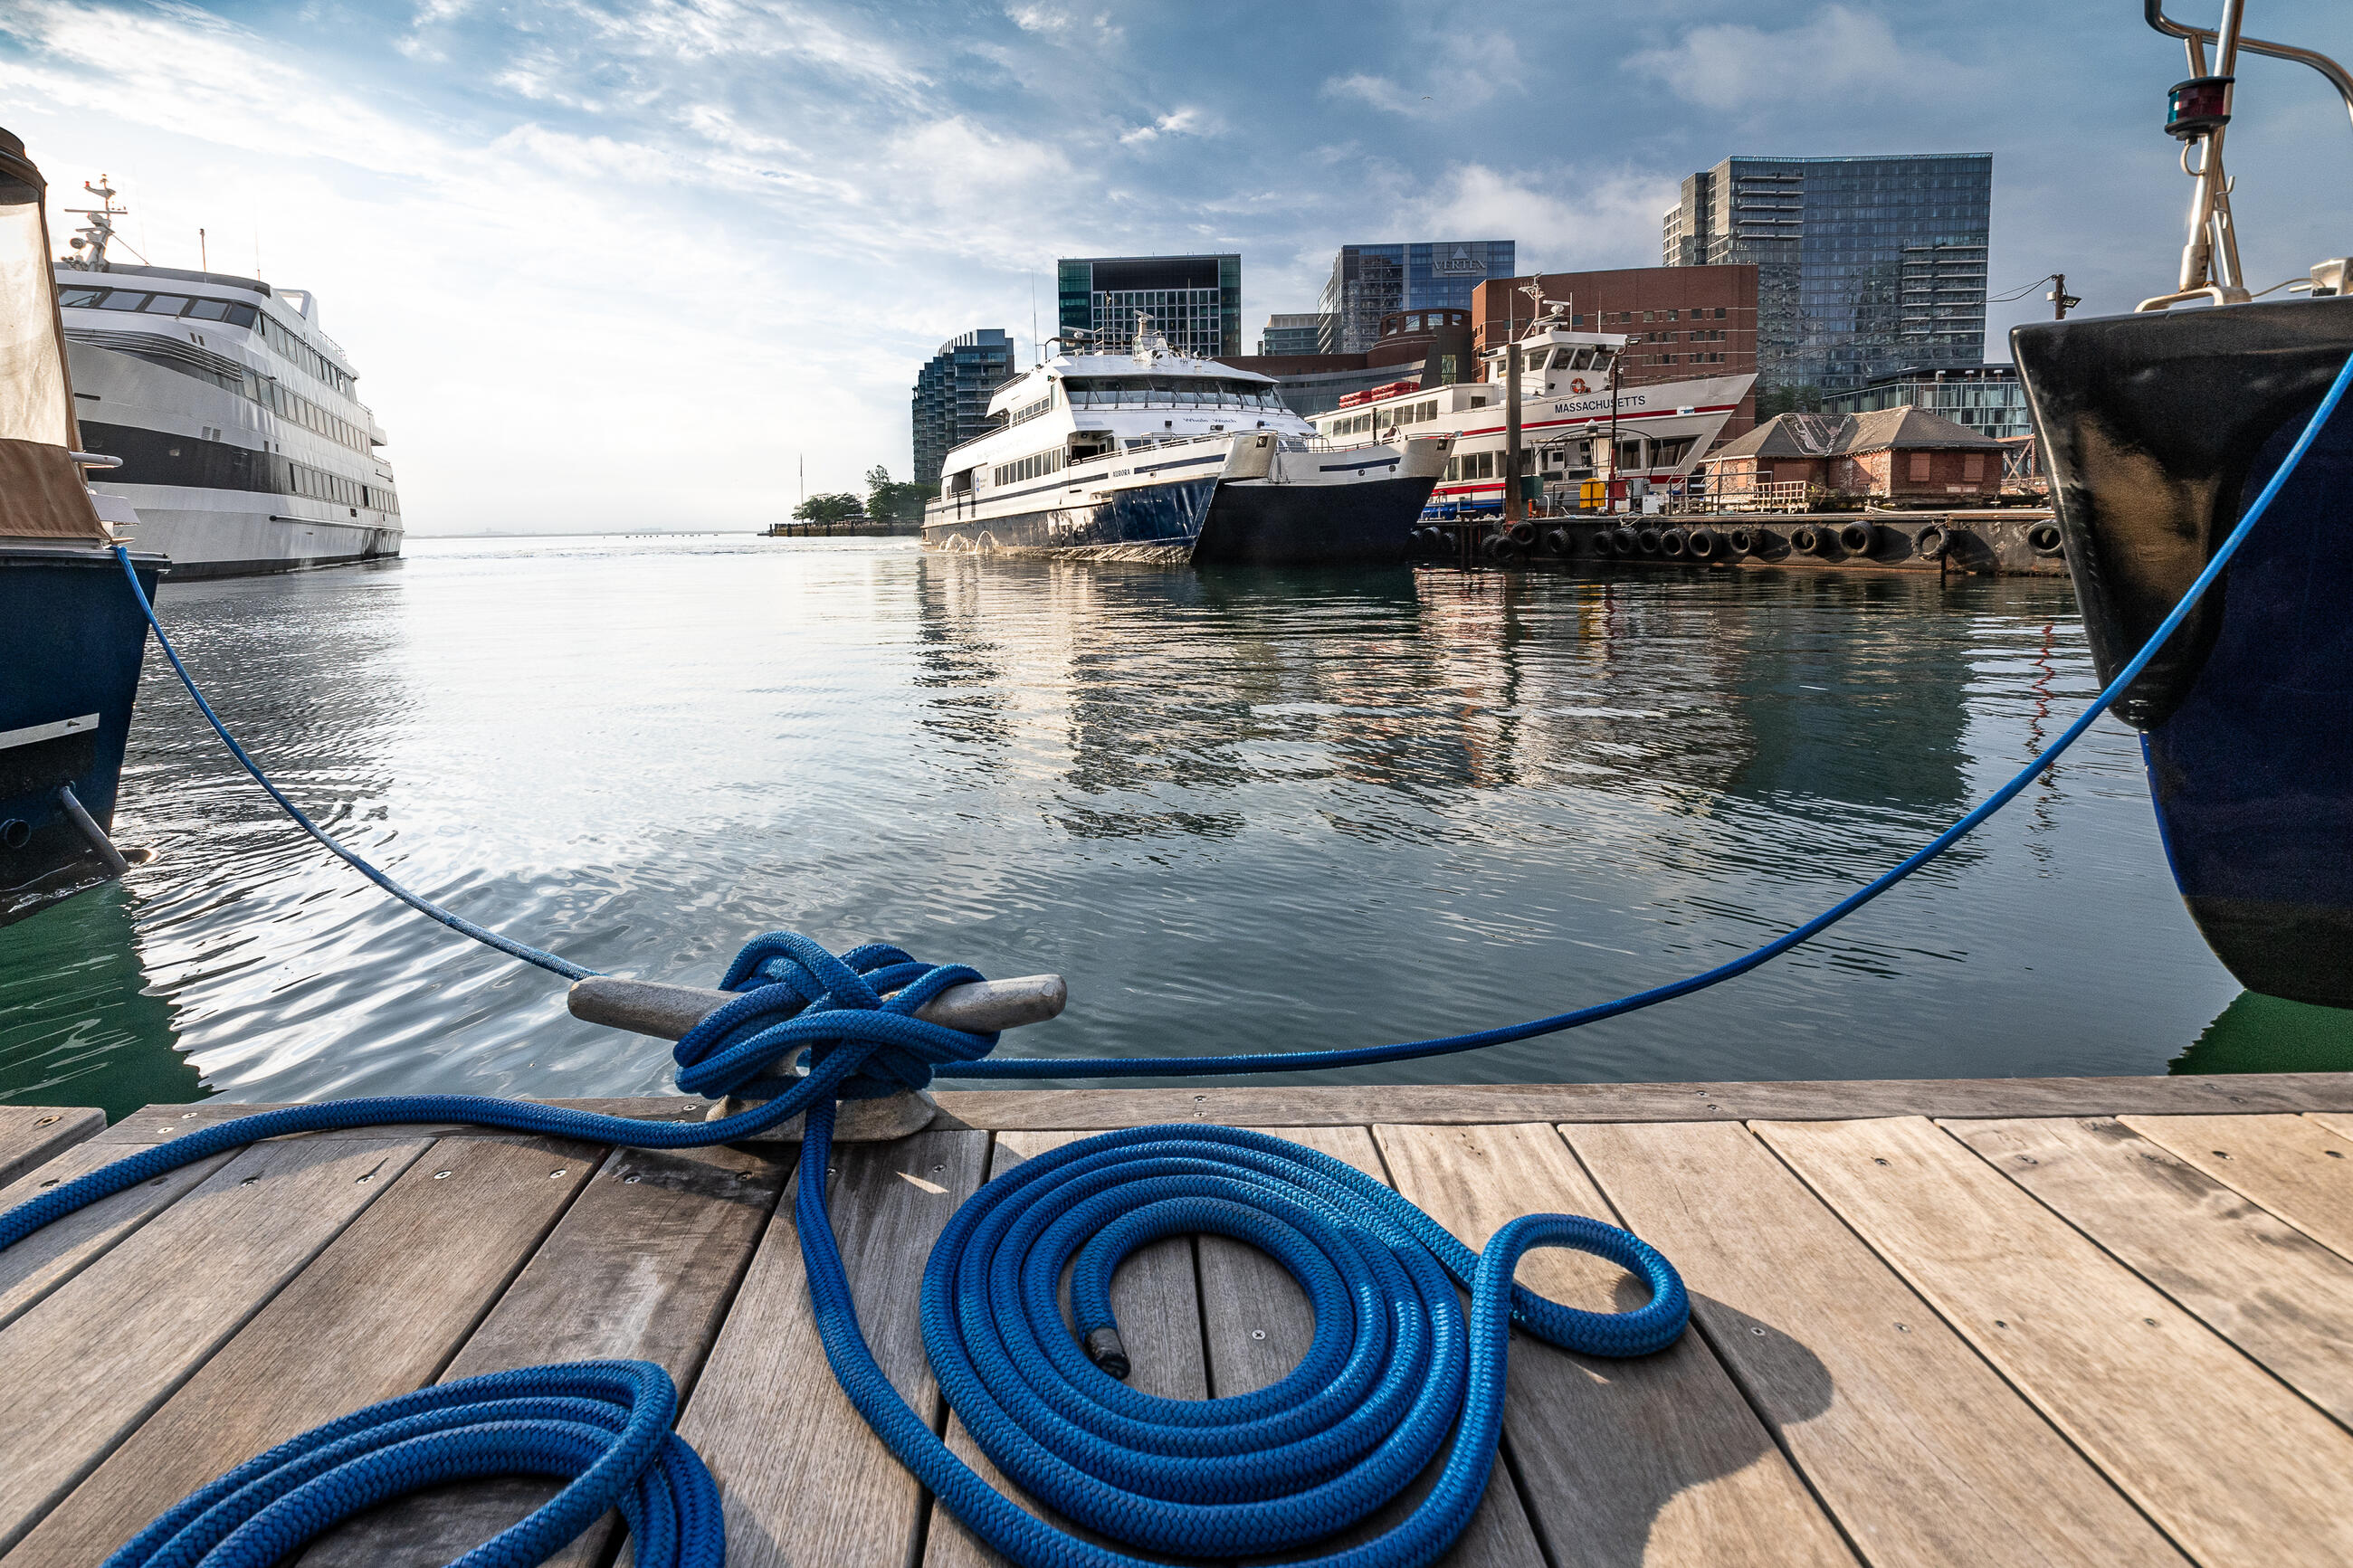 A photo of a ferry in the water, taken from the Rowes Wharf dock. There's a large blue rope tied to the dock in the foreground.